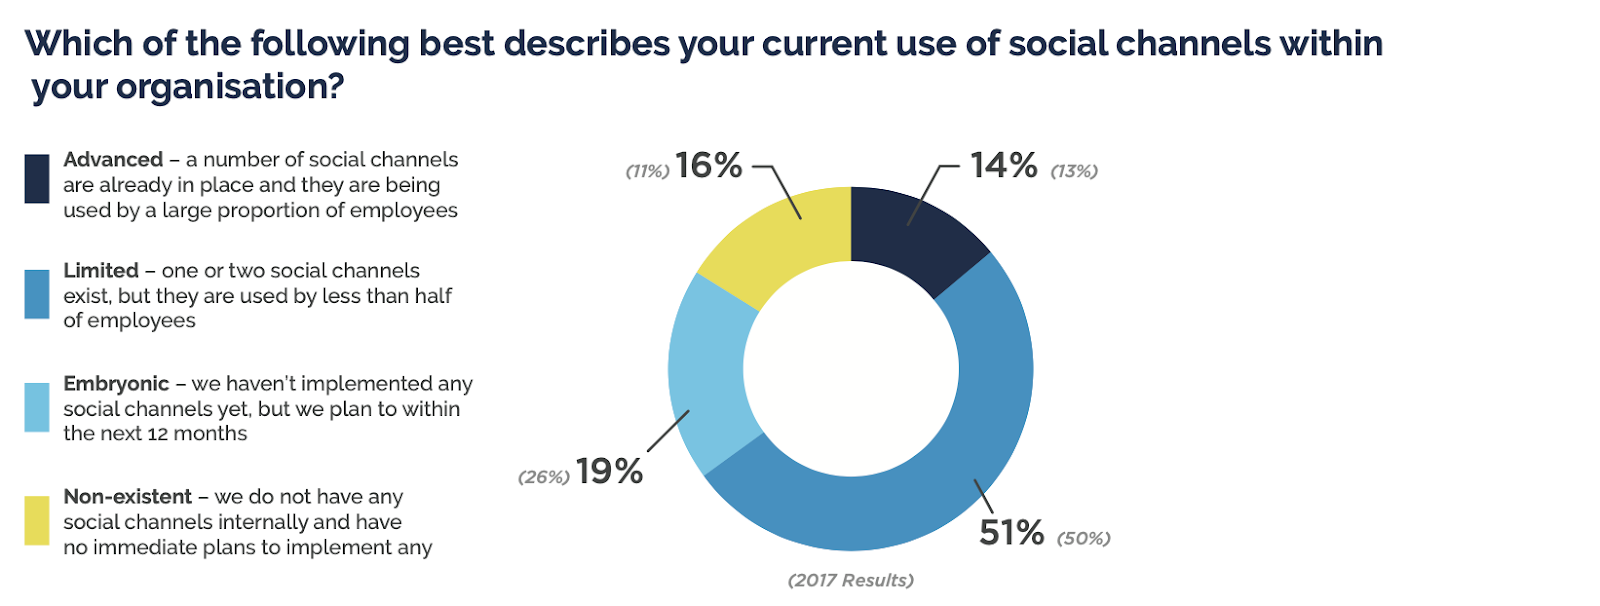 A pie chart showing that most organizations have "limited use" of social channels